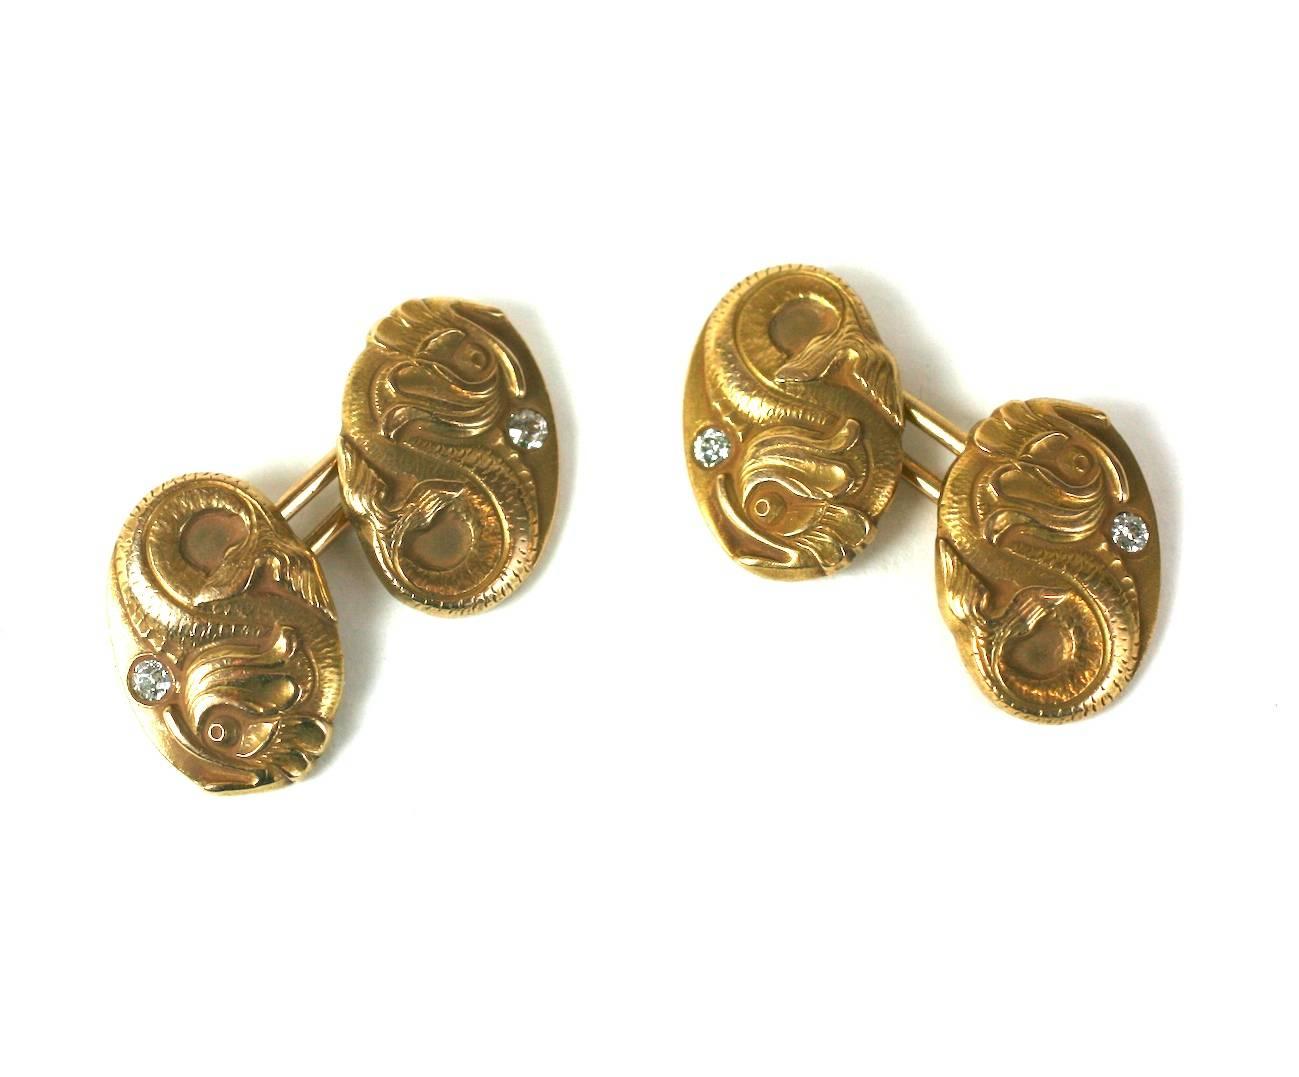 Art Nouveau Diamond Dolphin Cufflinks in 14k gold with diamonds. Exquisite quality and weight. Newark, N.J. 1890's USA.  5/8